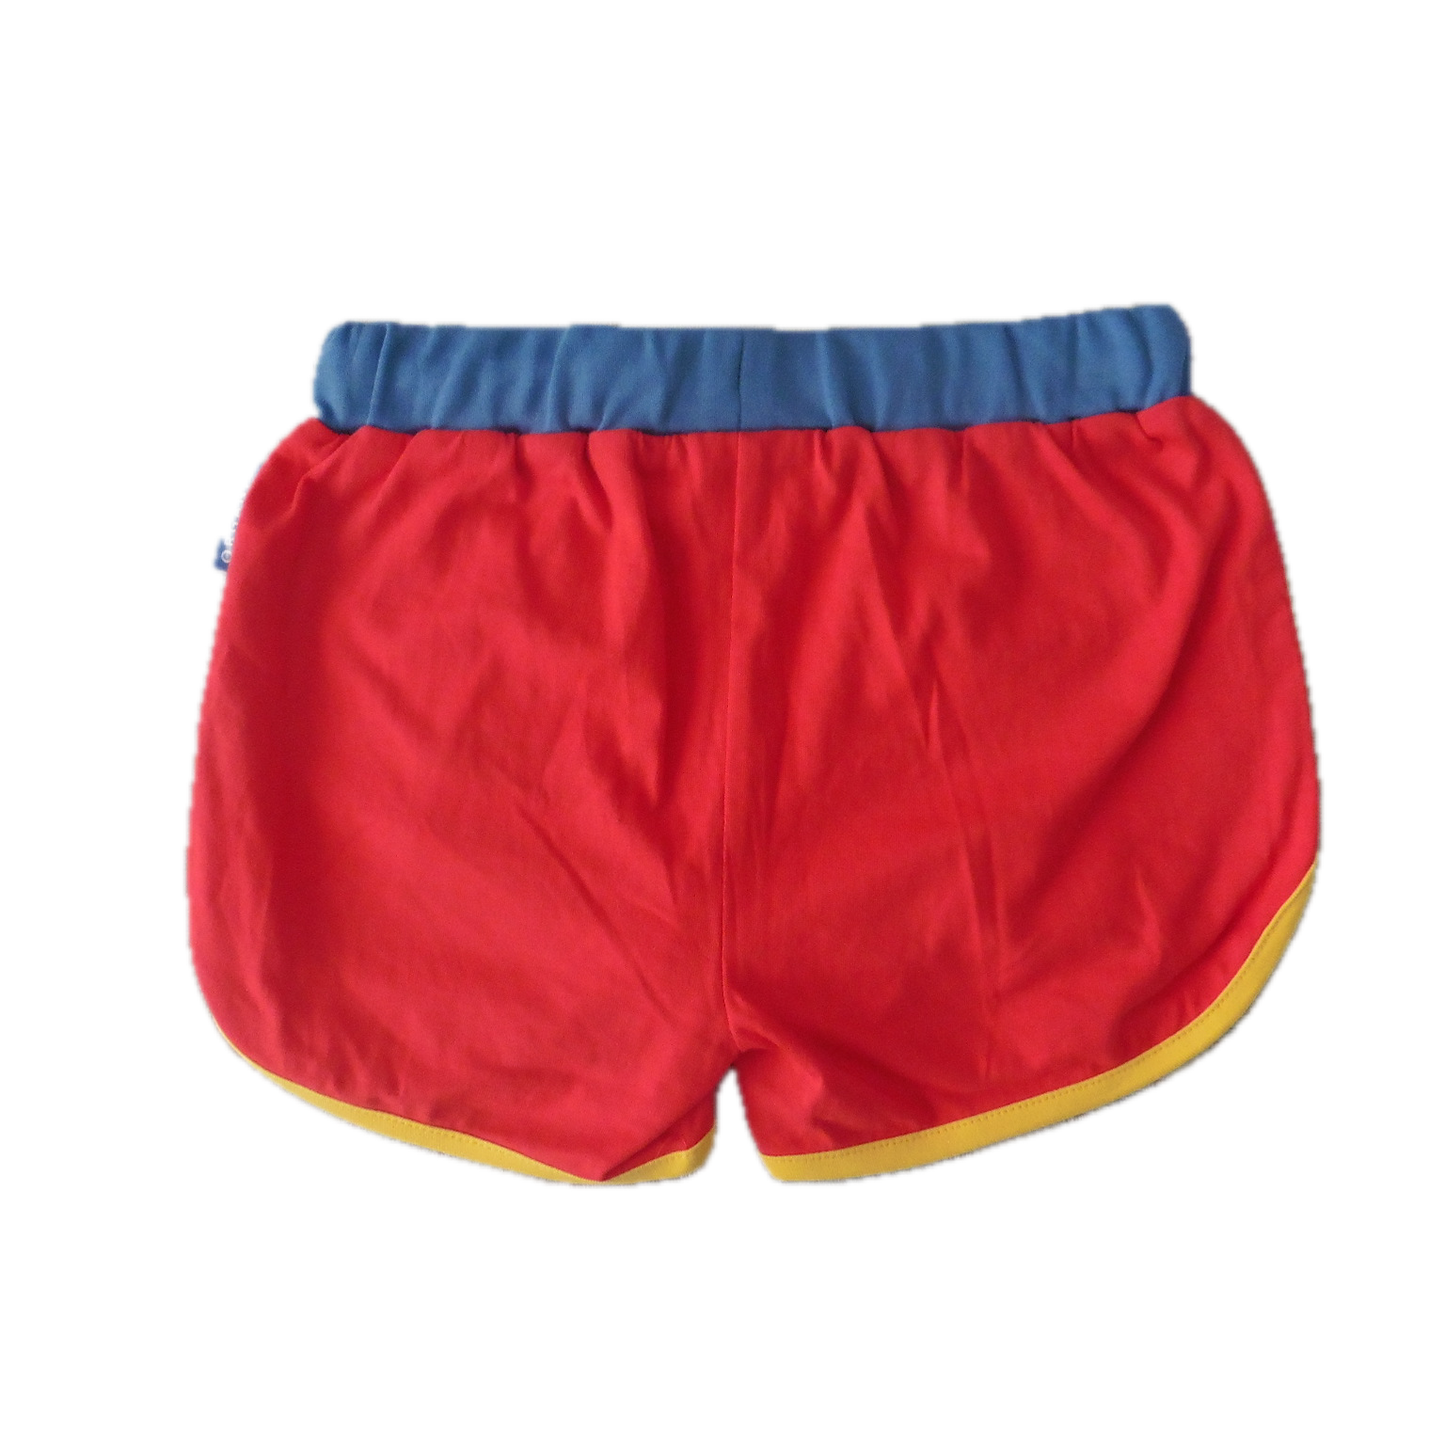 New Toby Tiger red runner shorts 5-6y